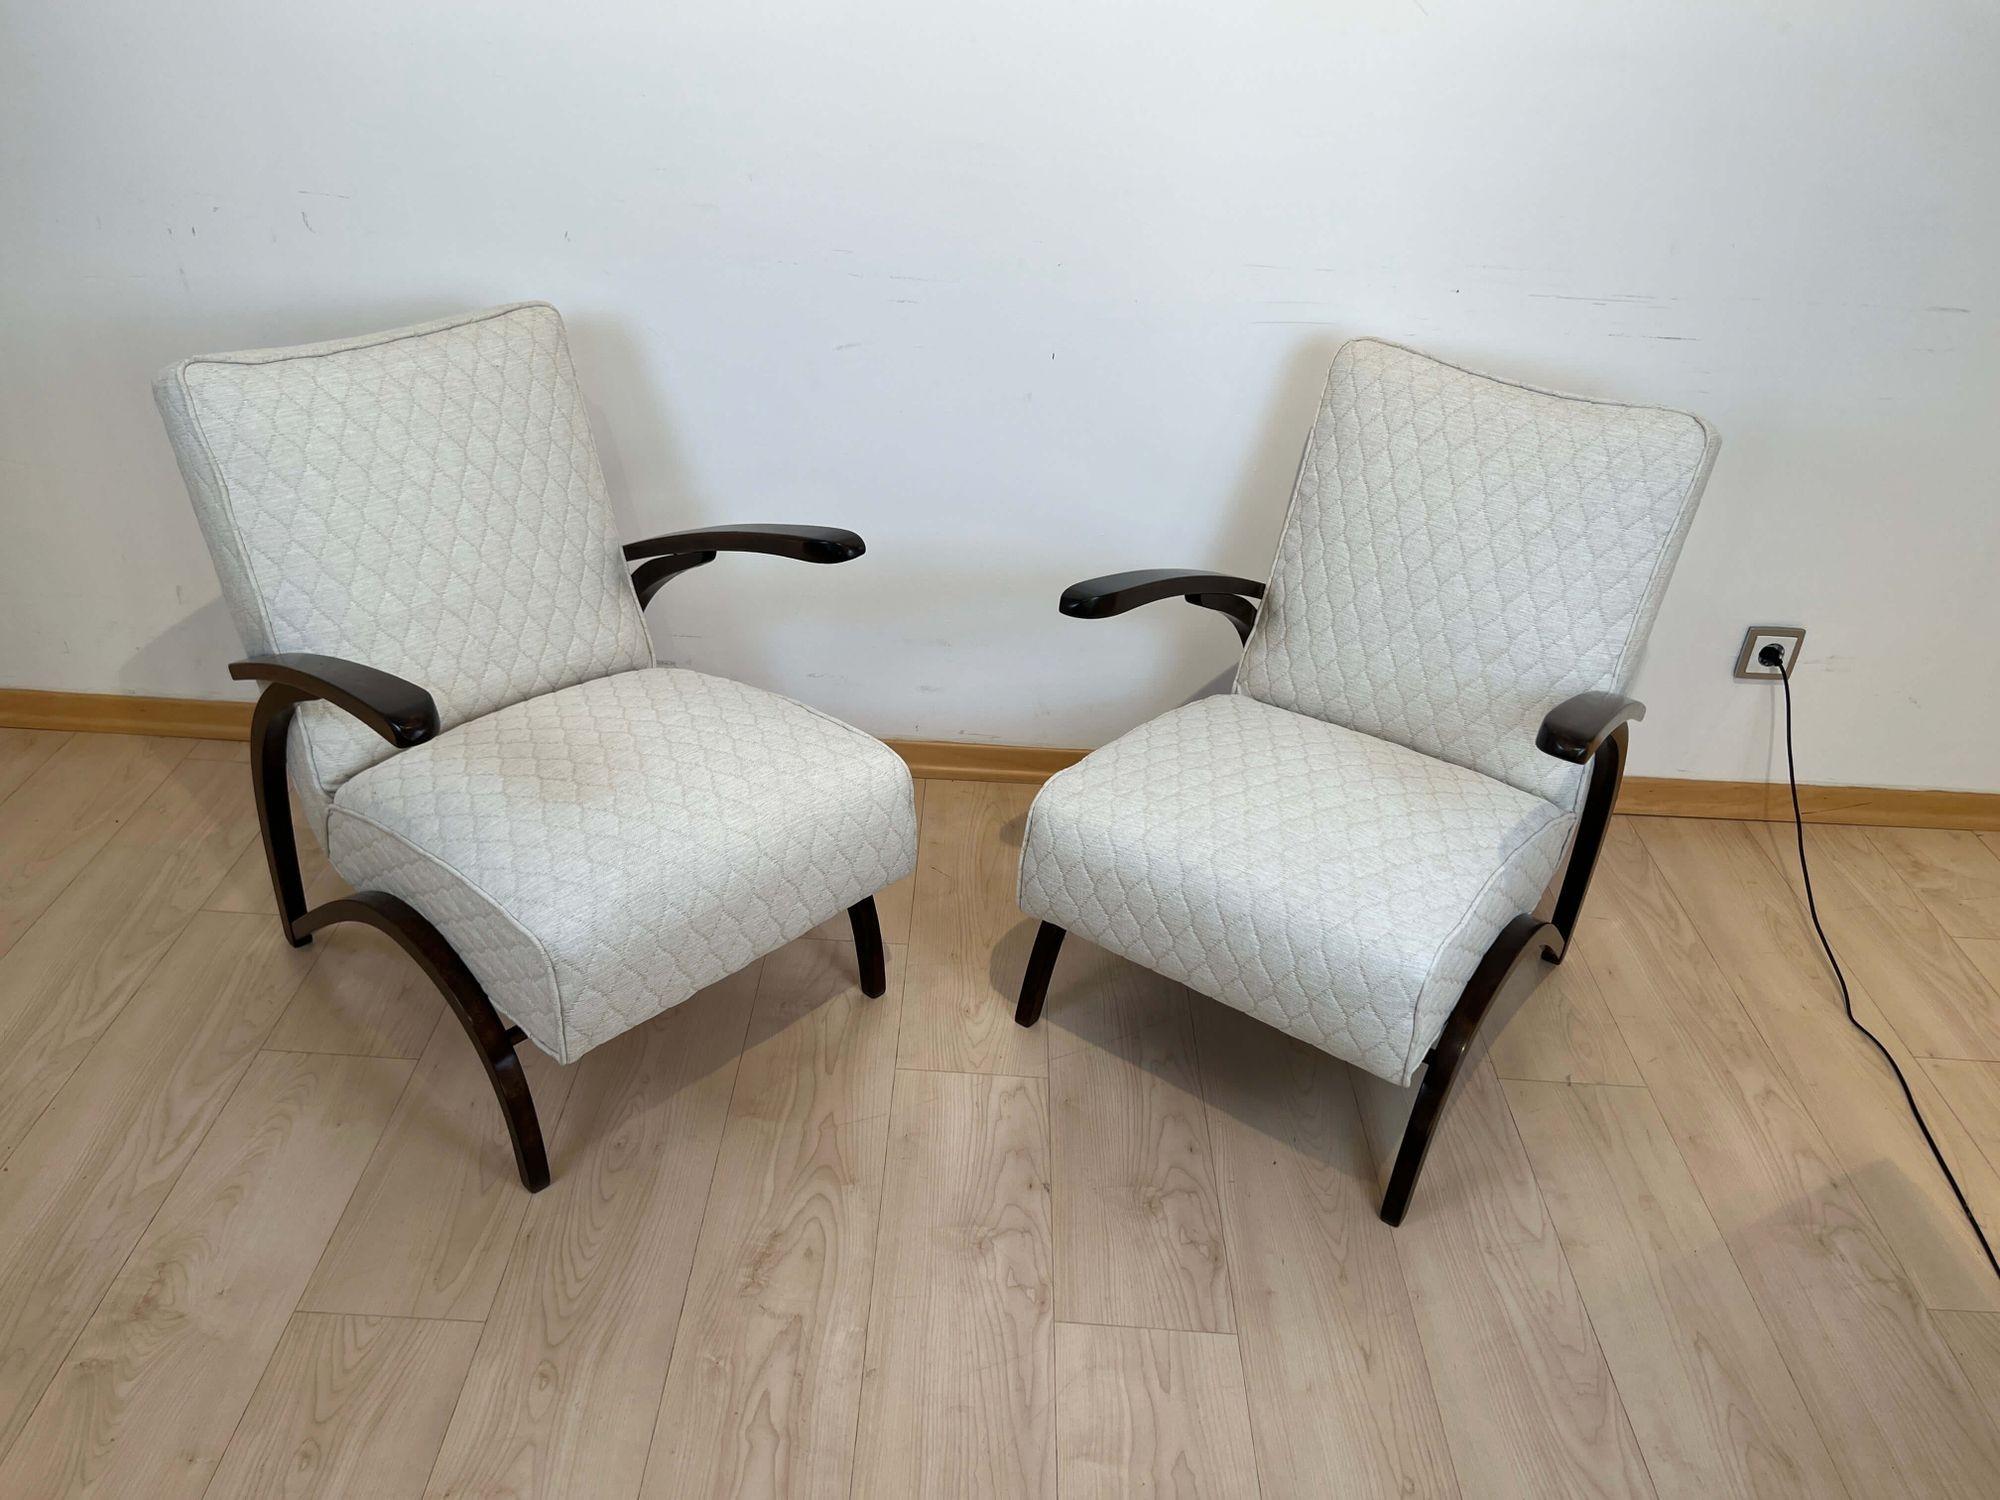 Early 20th Century Pair of Art Deco Lounge Chairs by J. Halabala, Czech Republic circa 1930 For Sale